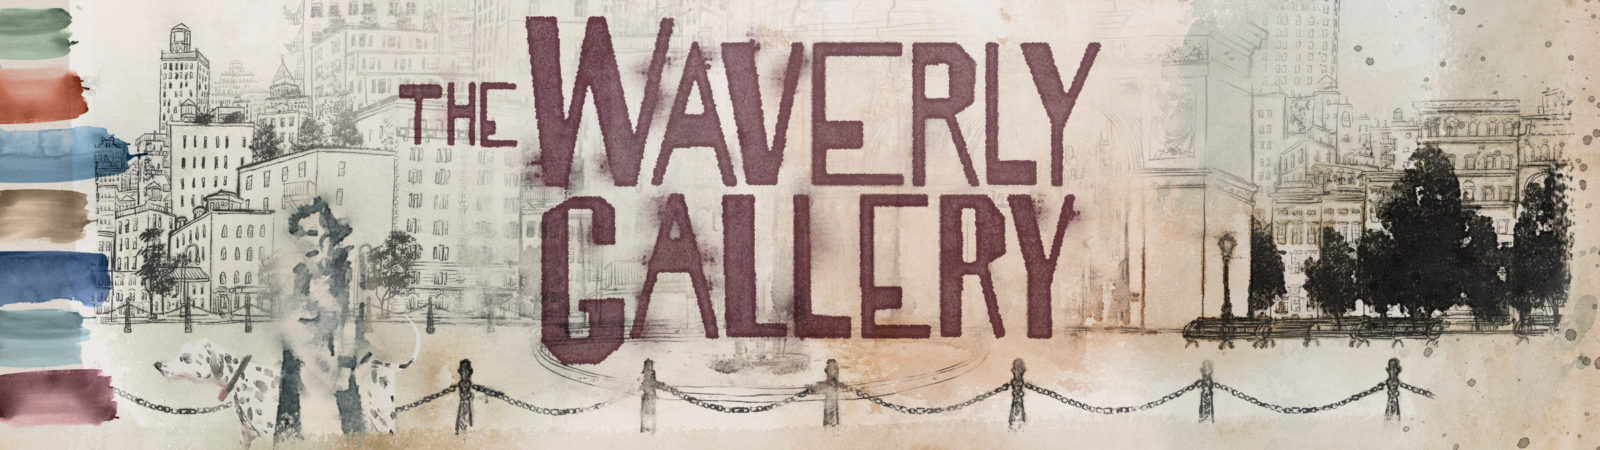 Sunday's @ 7 presents The Waverly Gallery